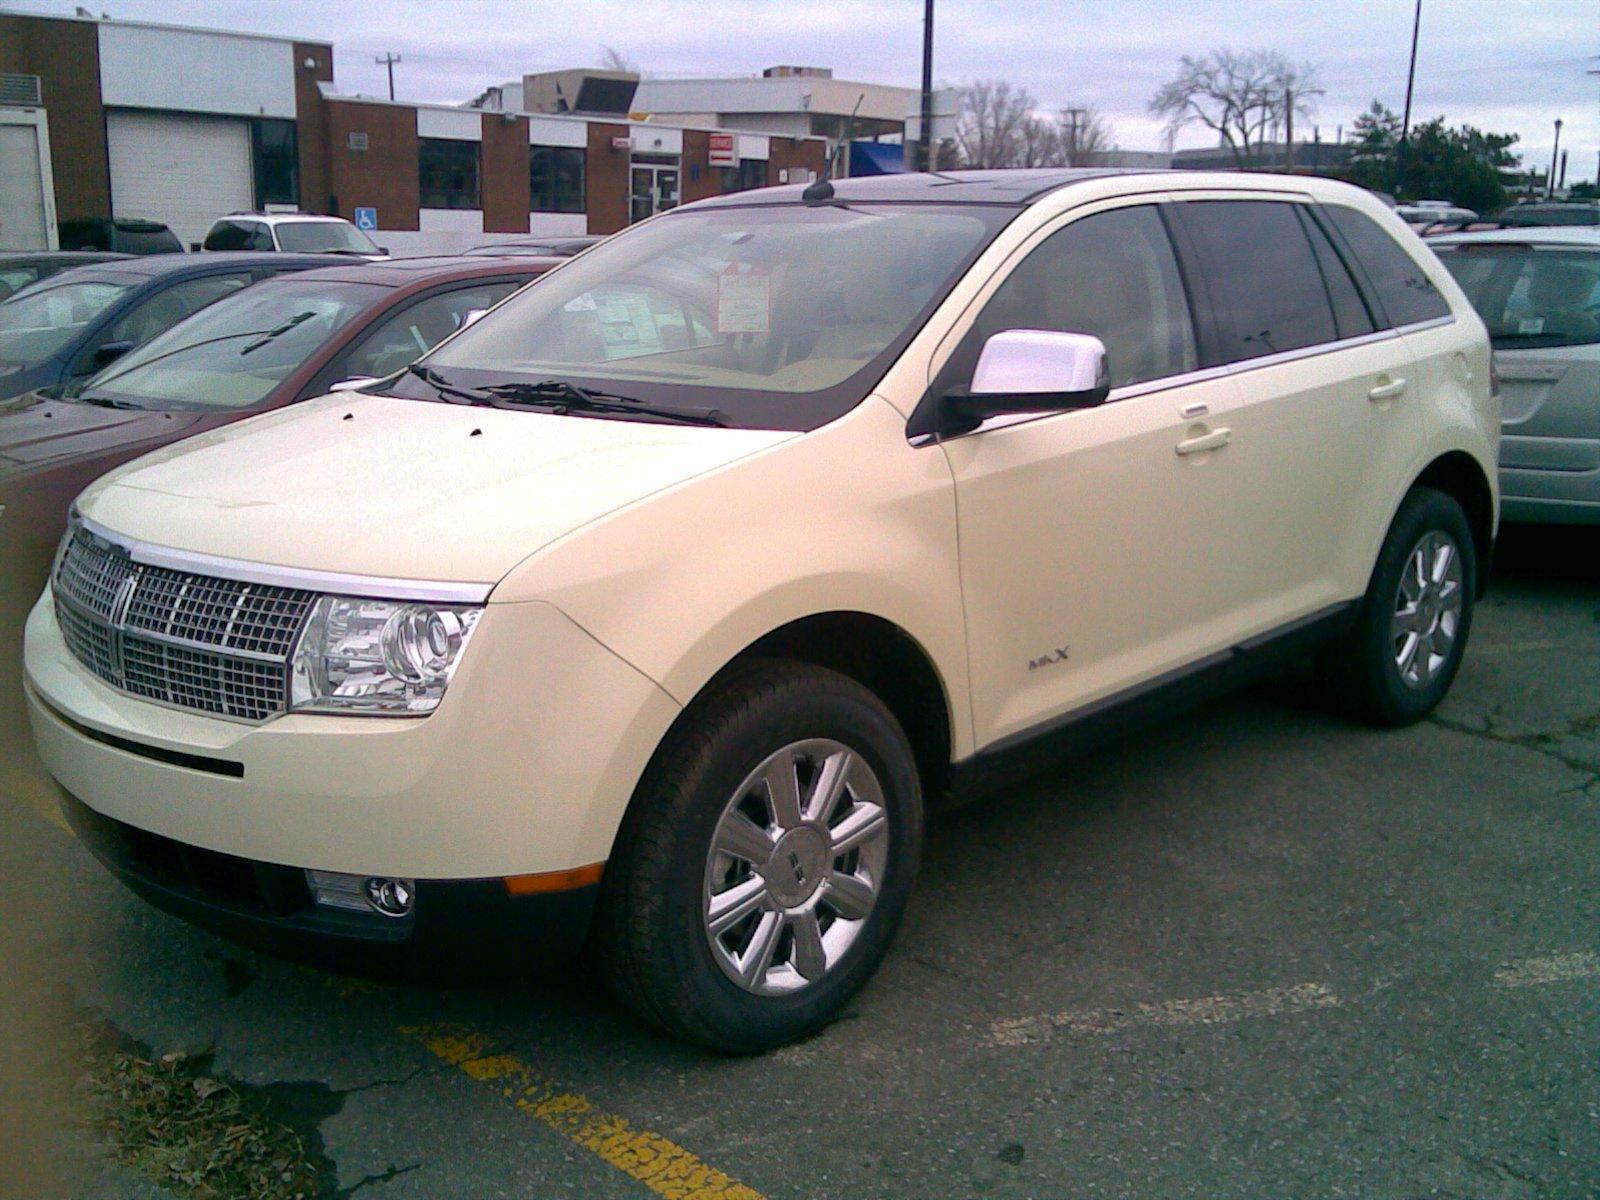 File:Lincoln MKX '07.jpg - Wikimedia Commons